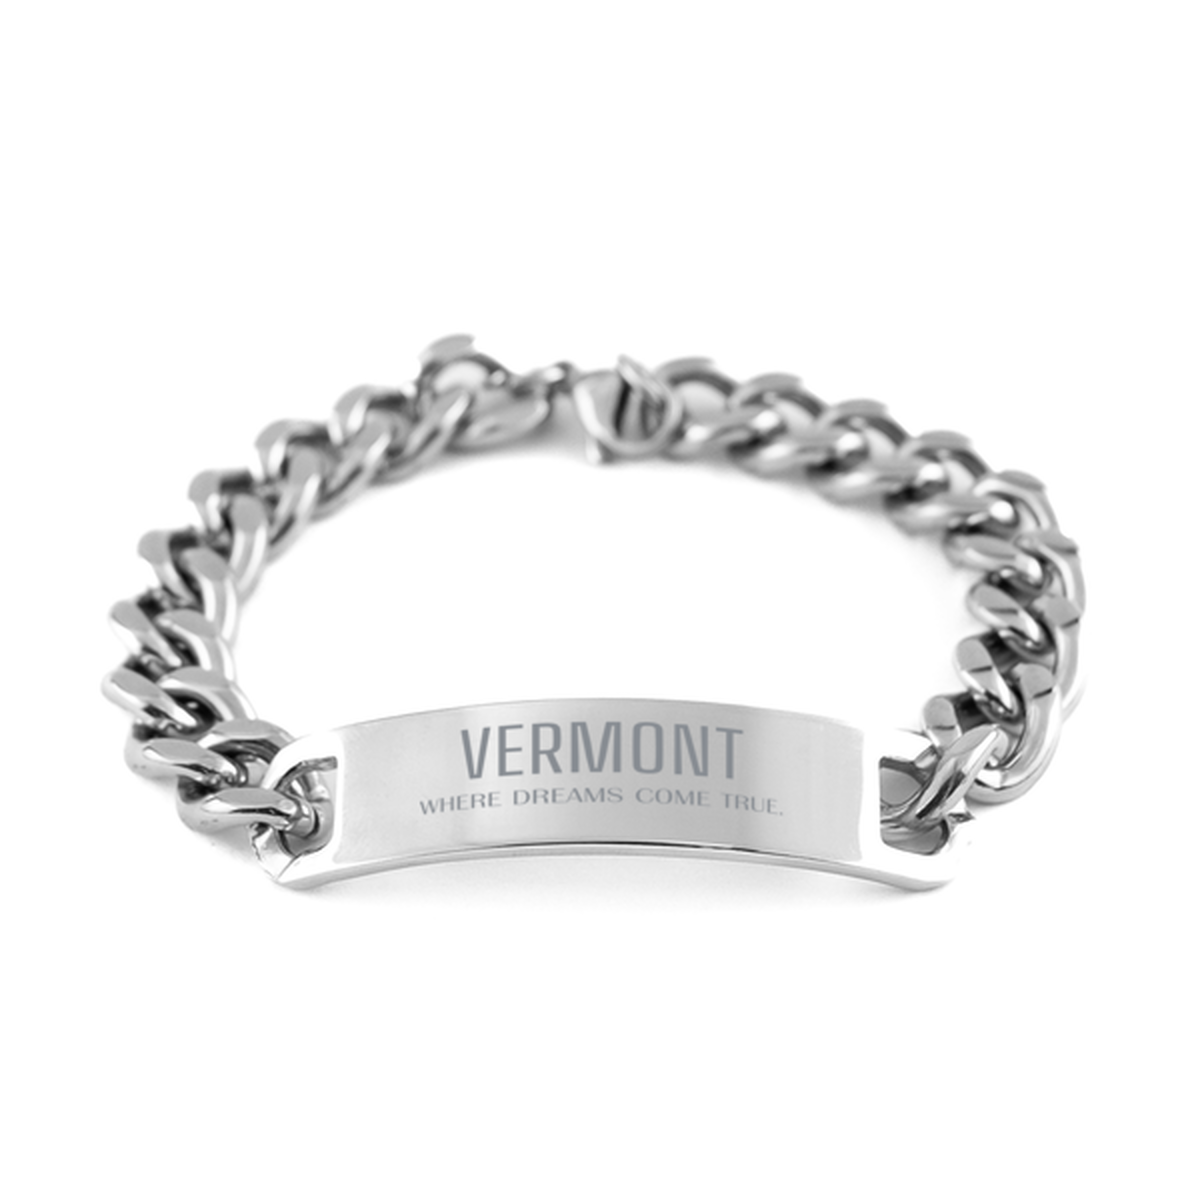 Love Vermont State Cuban Chain Stainless Steel Bracelet, Vermont Where dreams come true, Birthday Inspirational Gifts For Vermont Men, Women, Friends